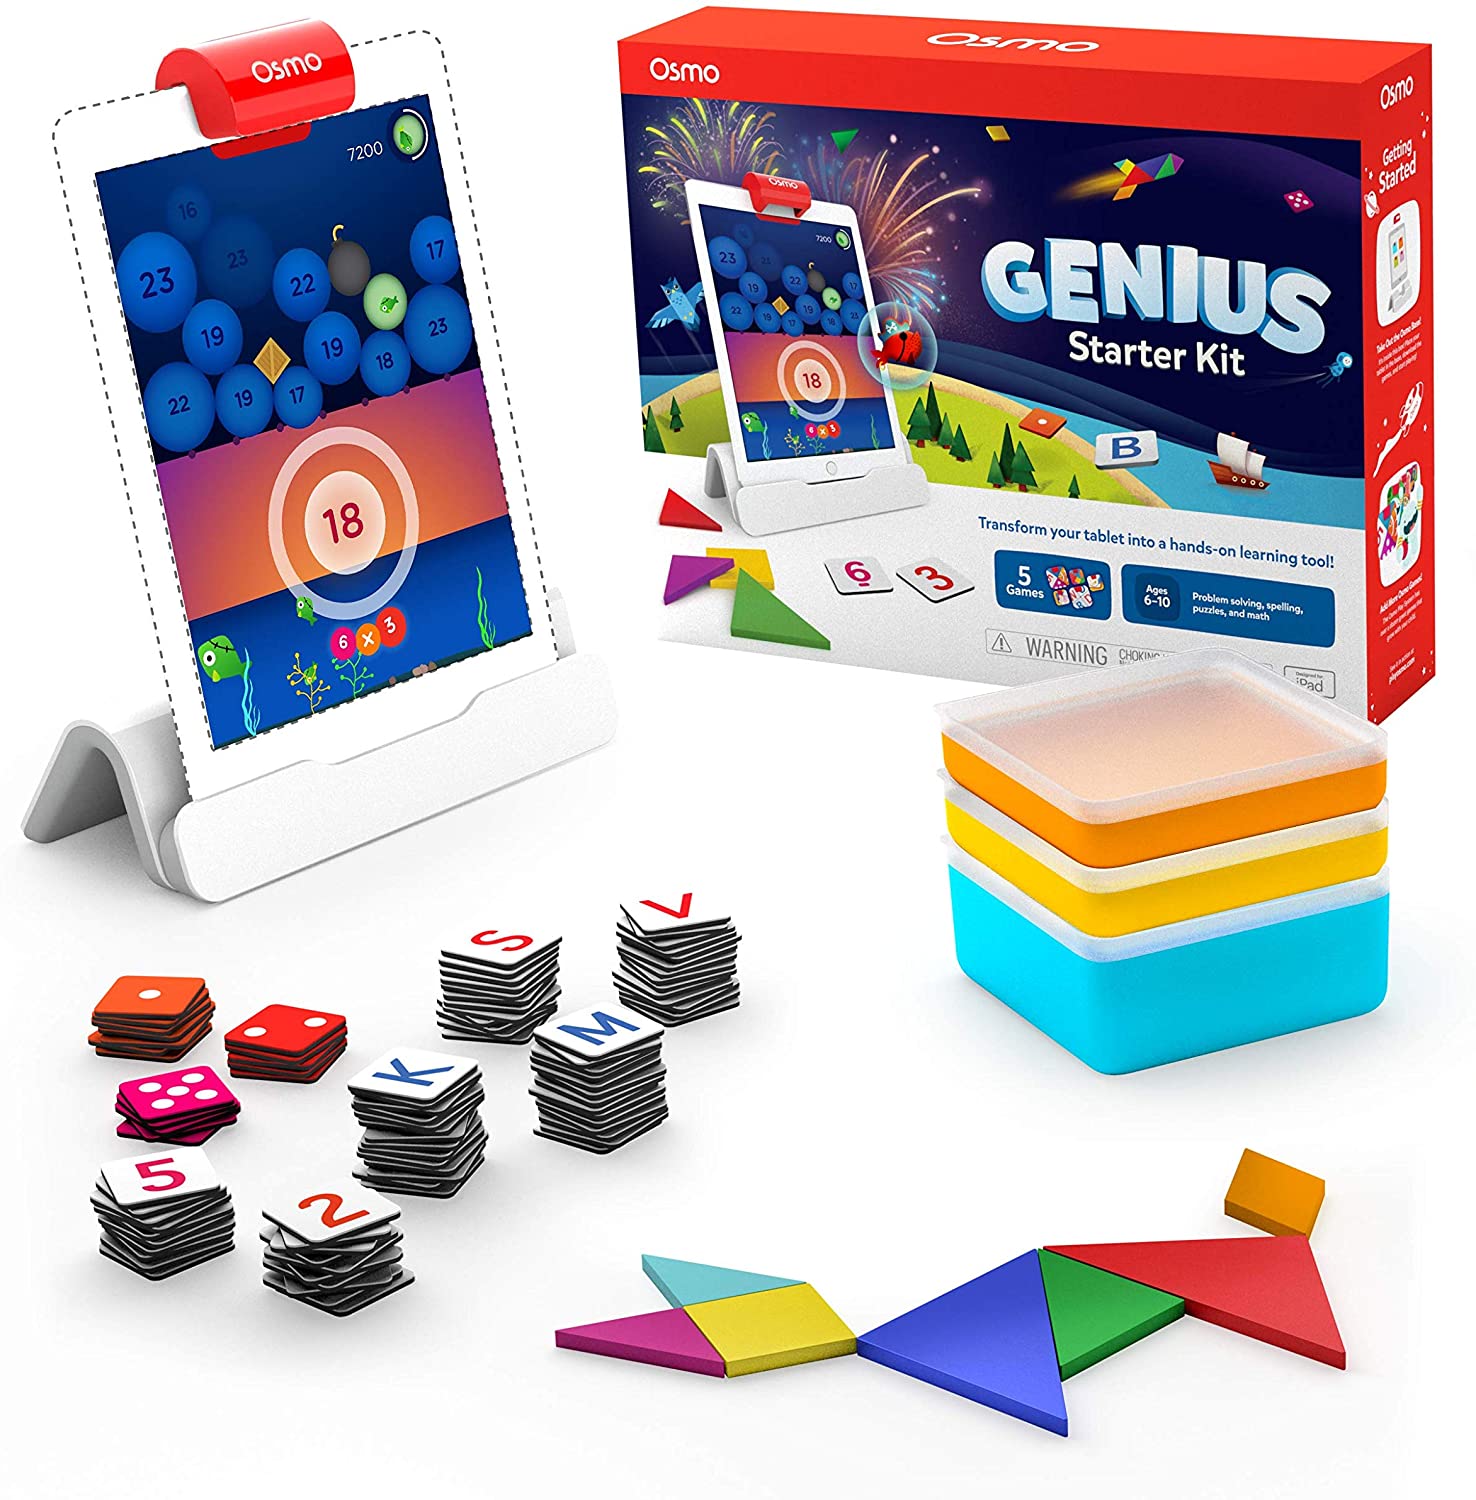 Featured image for “Osmo Genius Starter Kit (Tangible Play)”